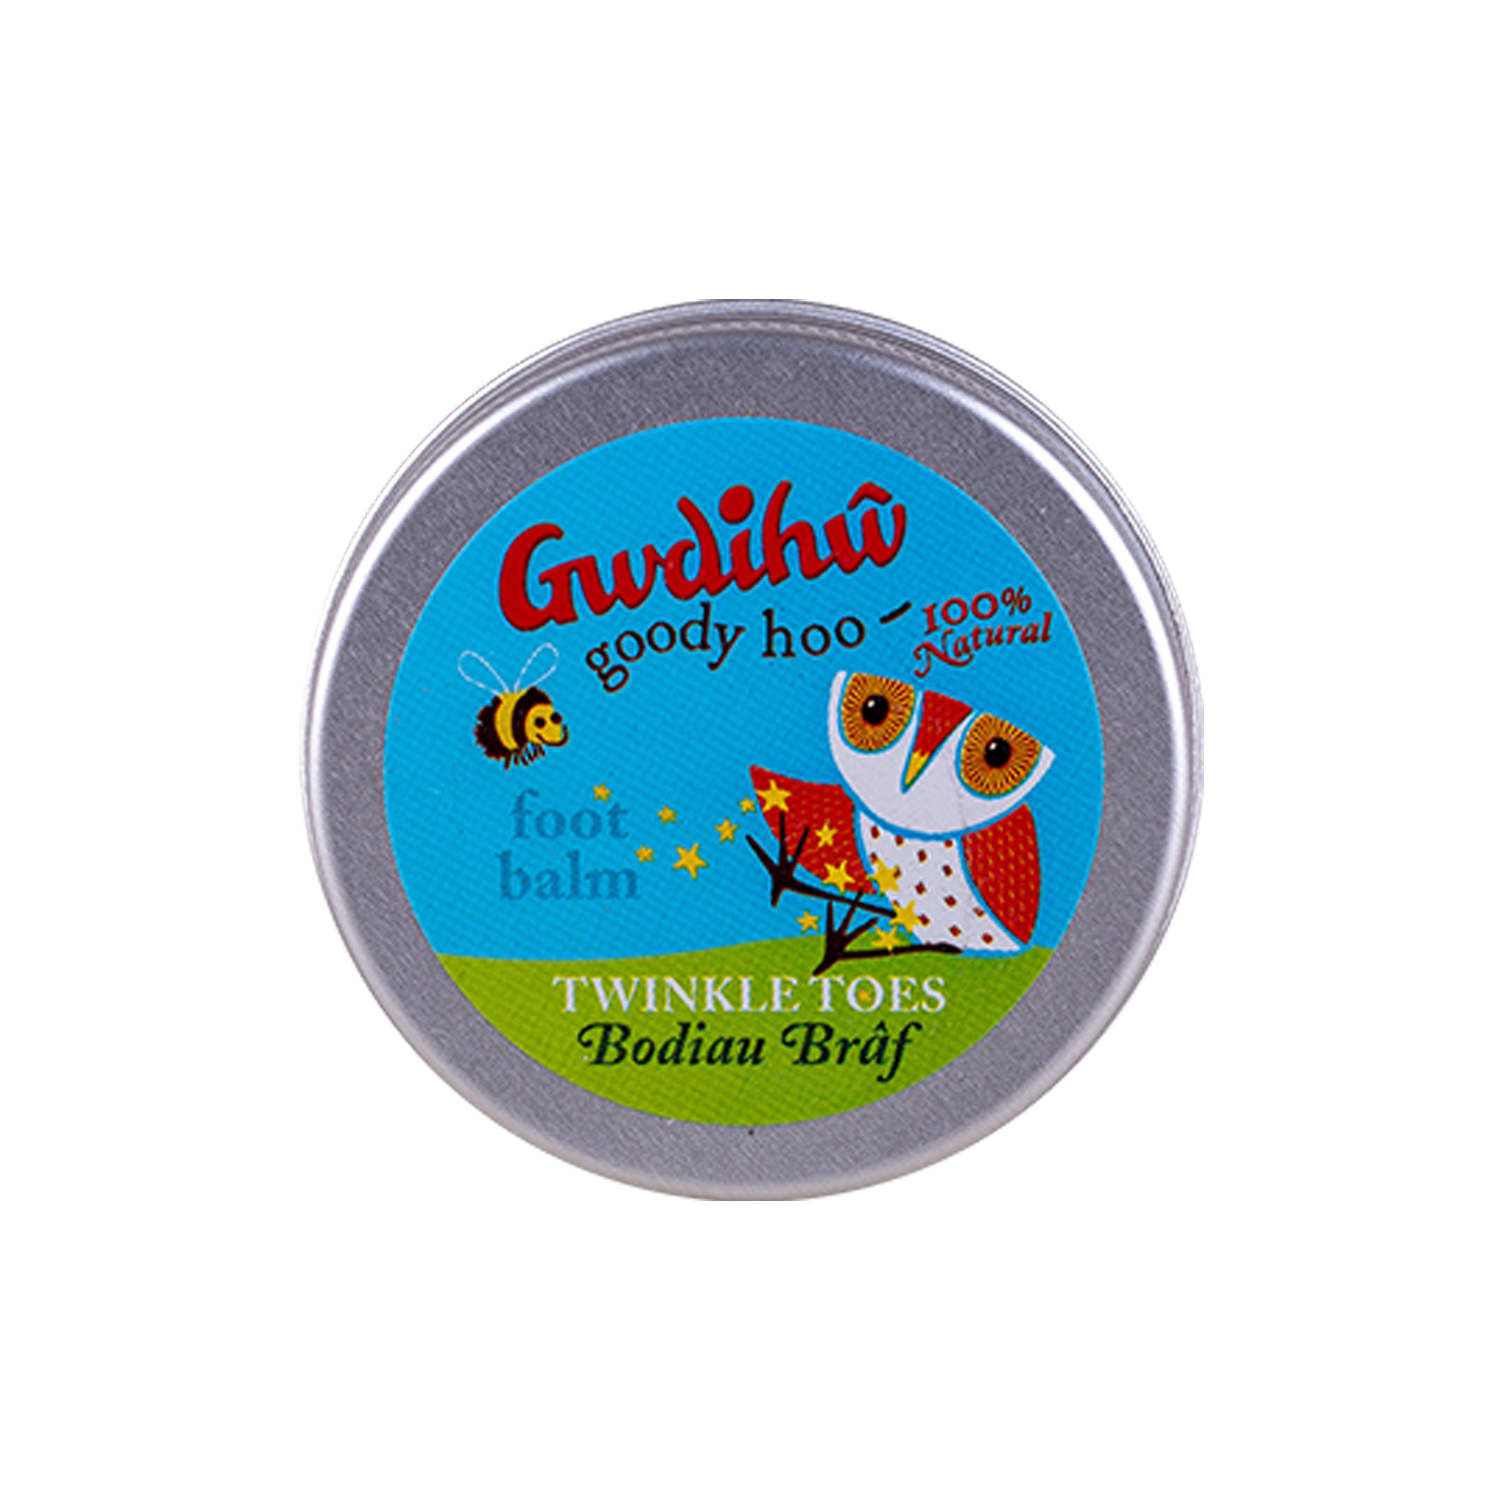 Small round tins with colourful owl illustrations.